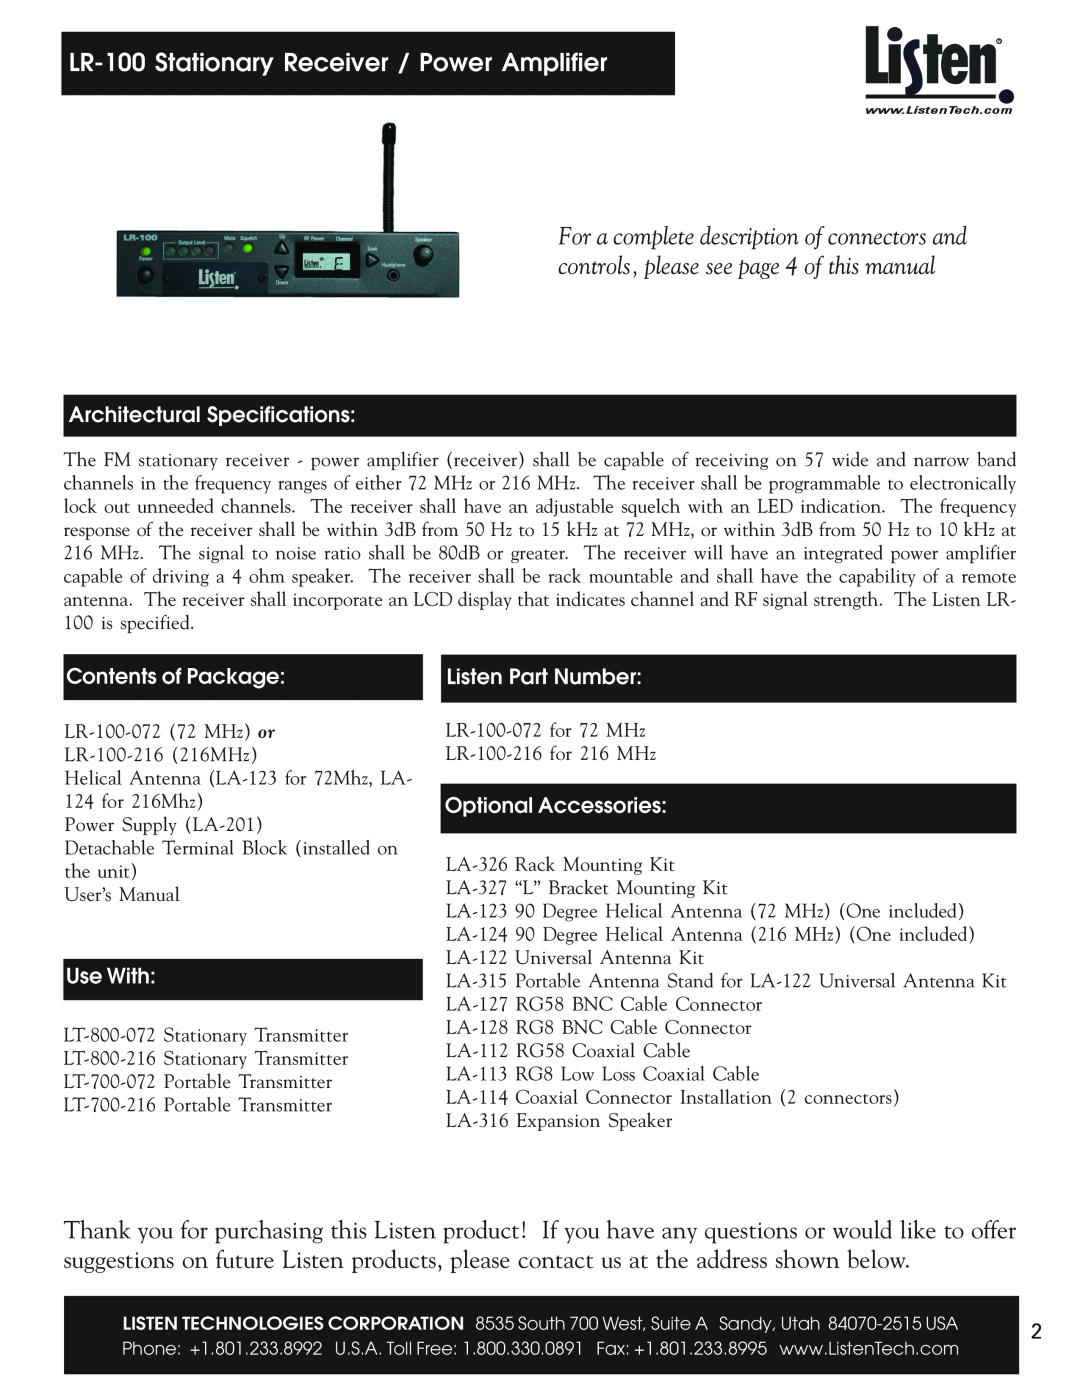 Listen Technologies LR-100Stationary Receiver / Power Amplifier, Architectural Specifications, Contents of Package 